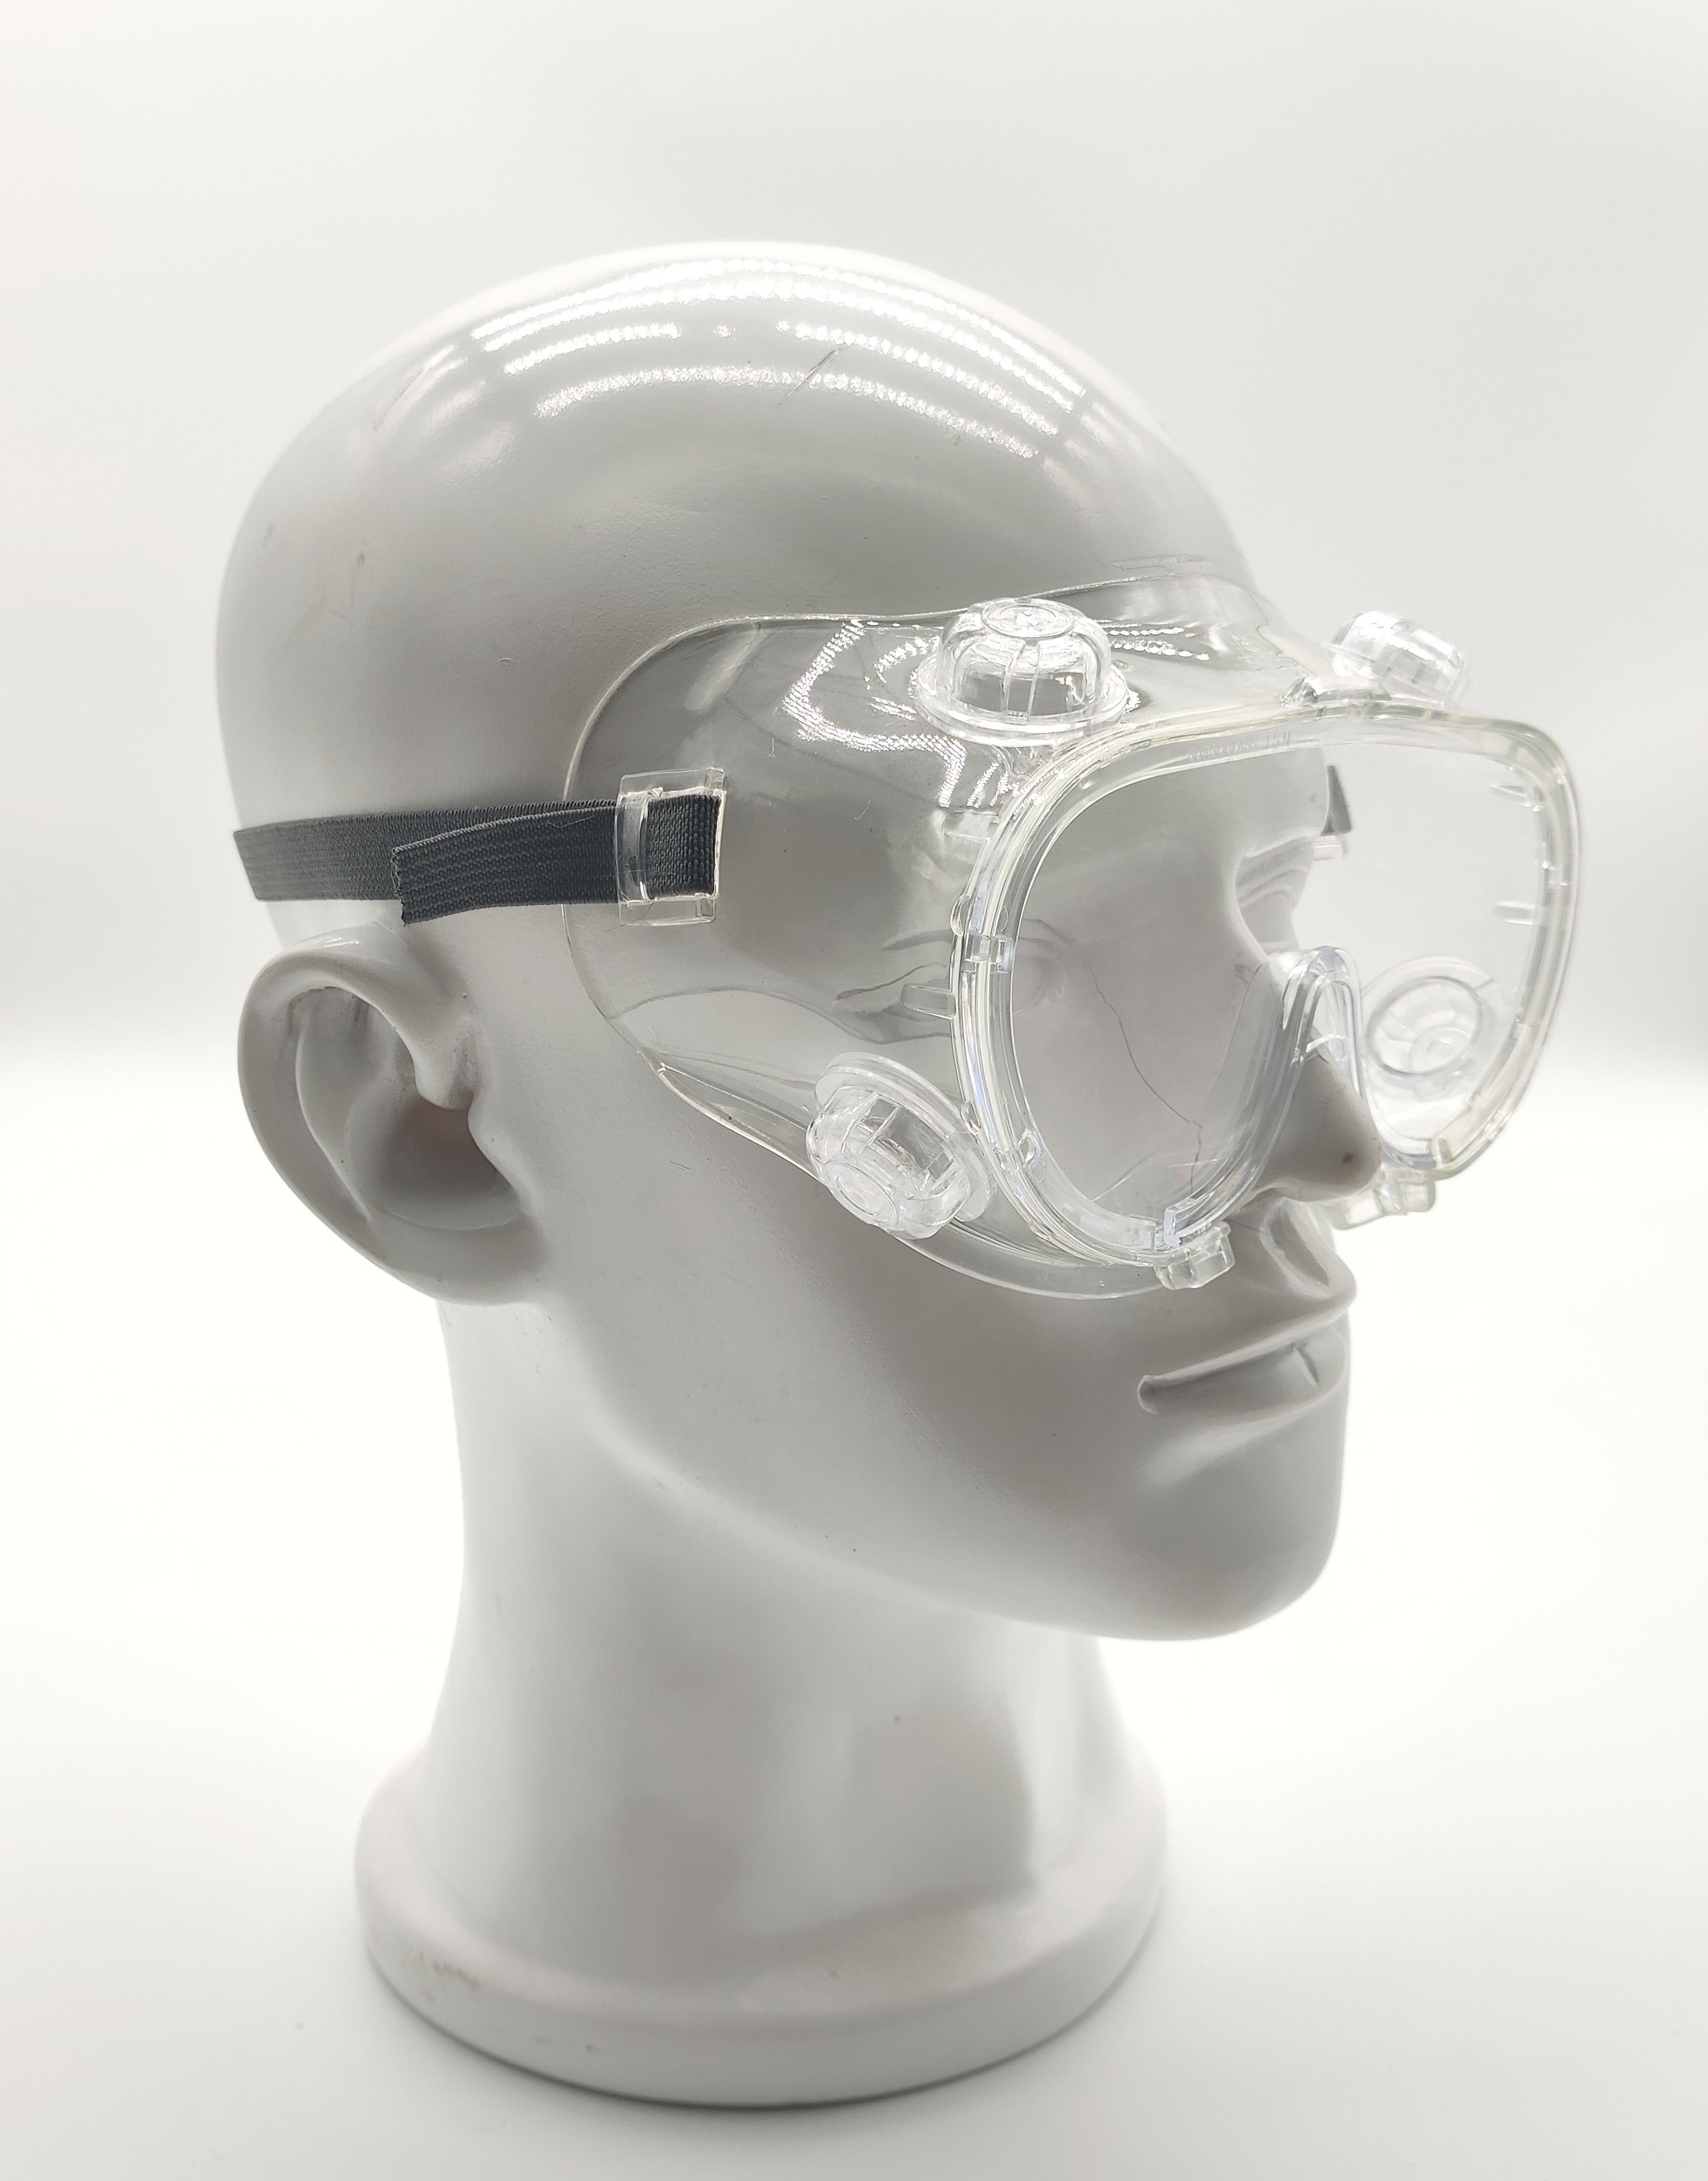 EN166:2001 Safety Goggles Adjustable Headband and Air Valves Anti Fog Anti UV Mirror Clear Vision PC and Medical PVC Universal Size individually Packed